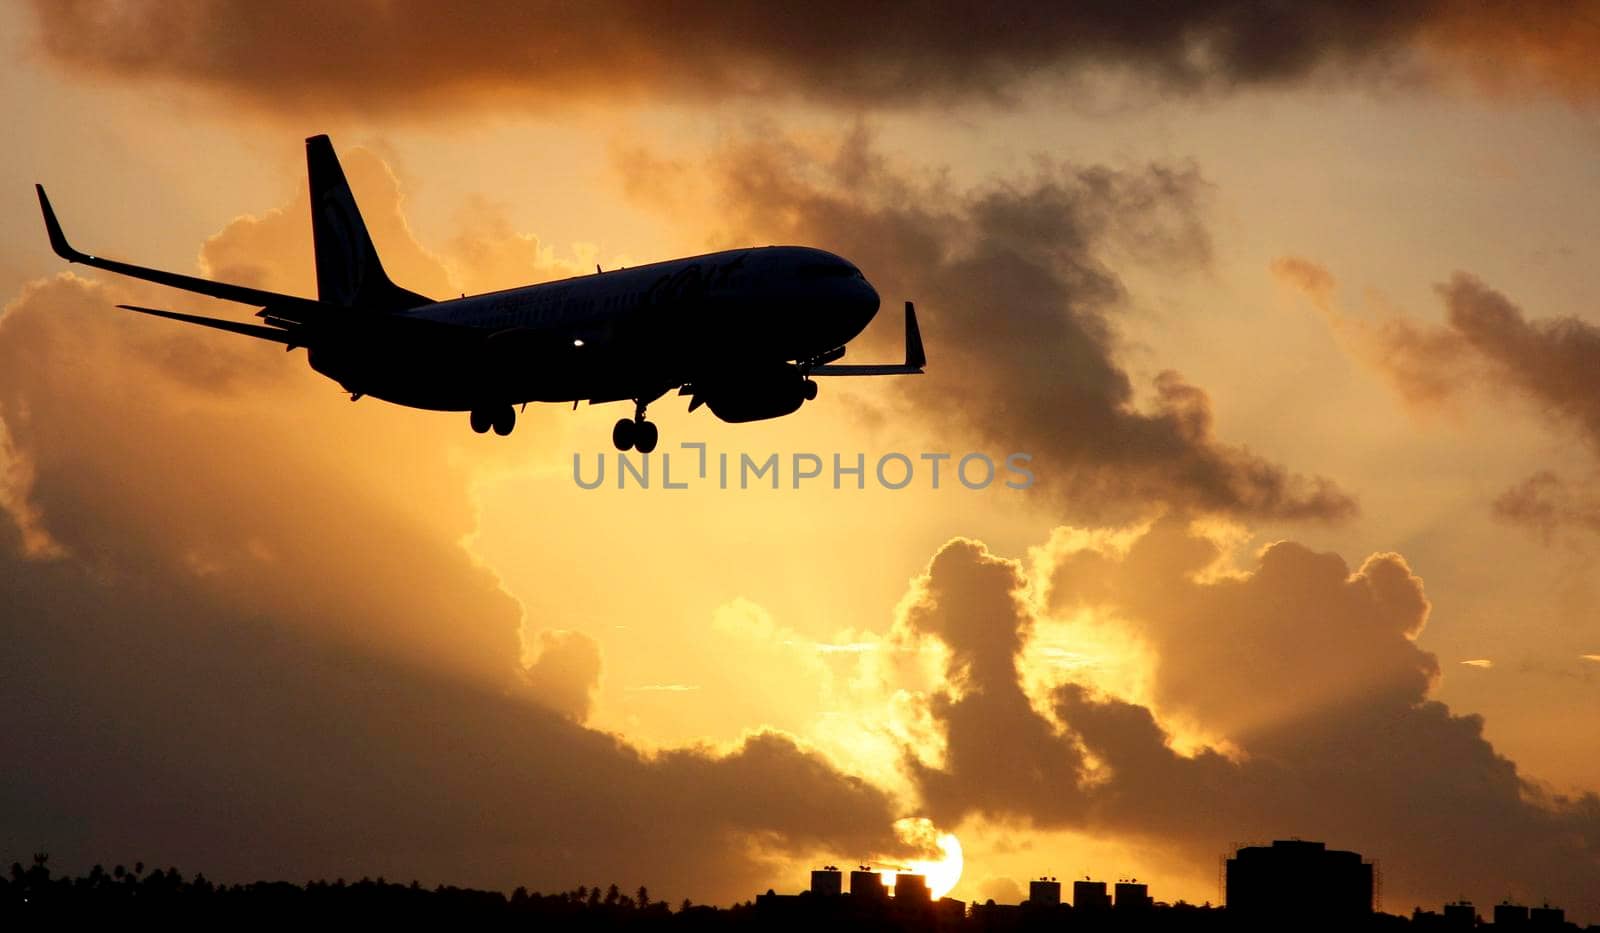 salvador, bahia / brazil - july 6, 2014: Boeing 737 of Gol Linhas Aereas seen during approach to land on Salvador Airport runway.
